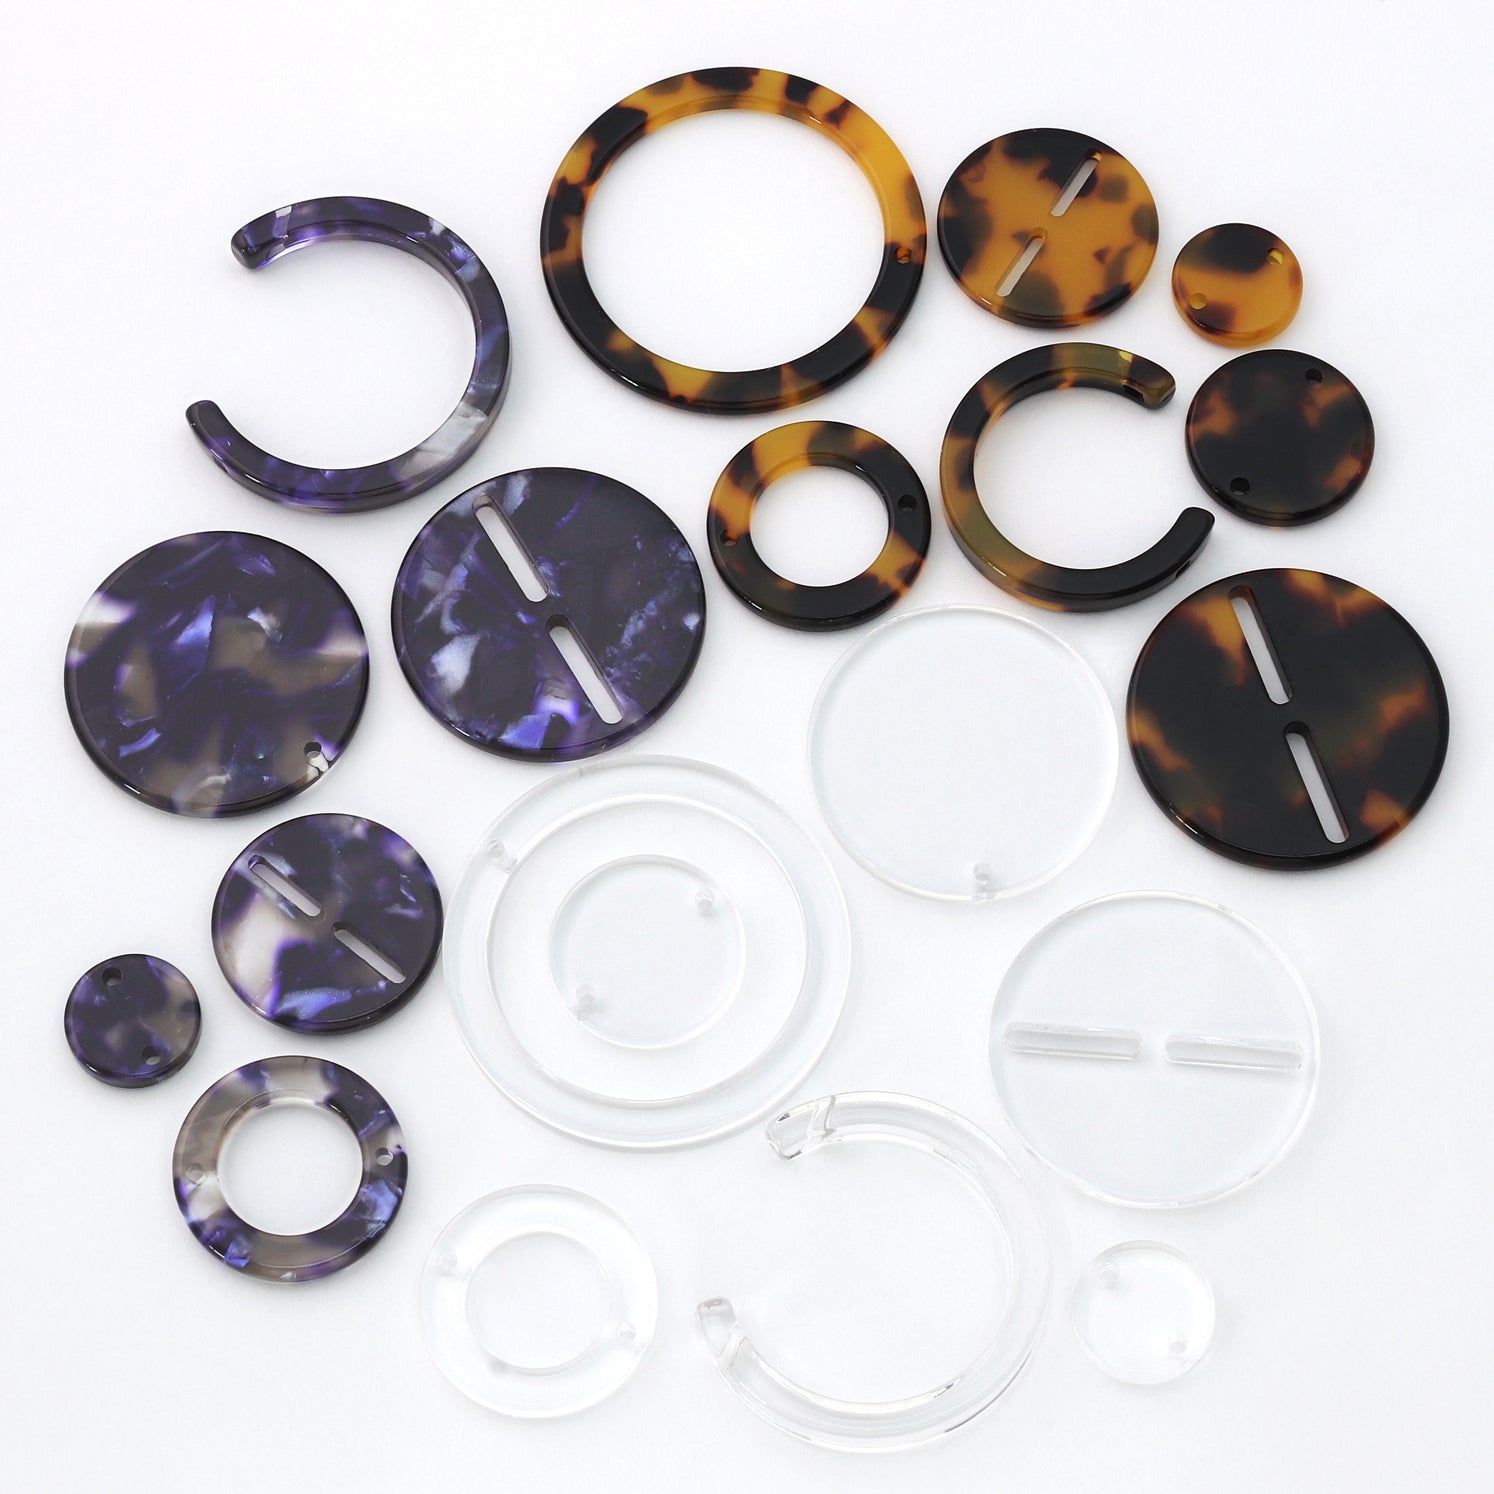 Acrylic parts button type clear [Outlet]